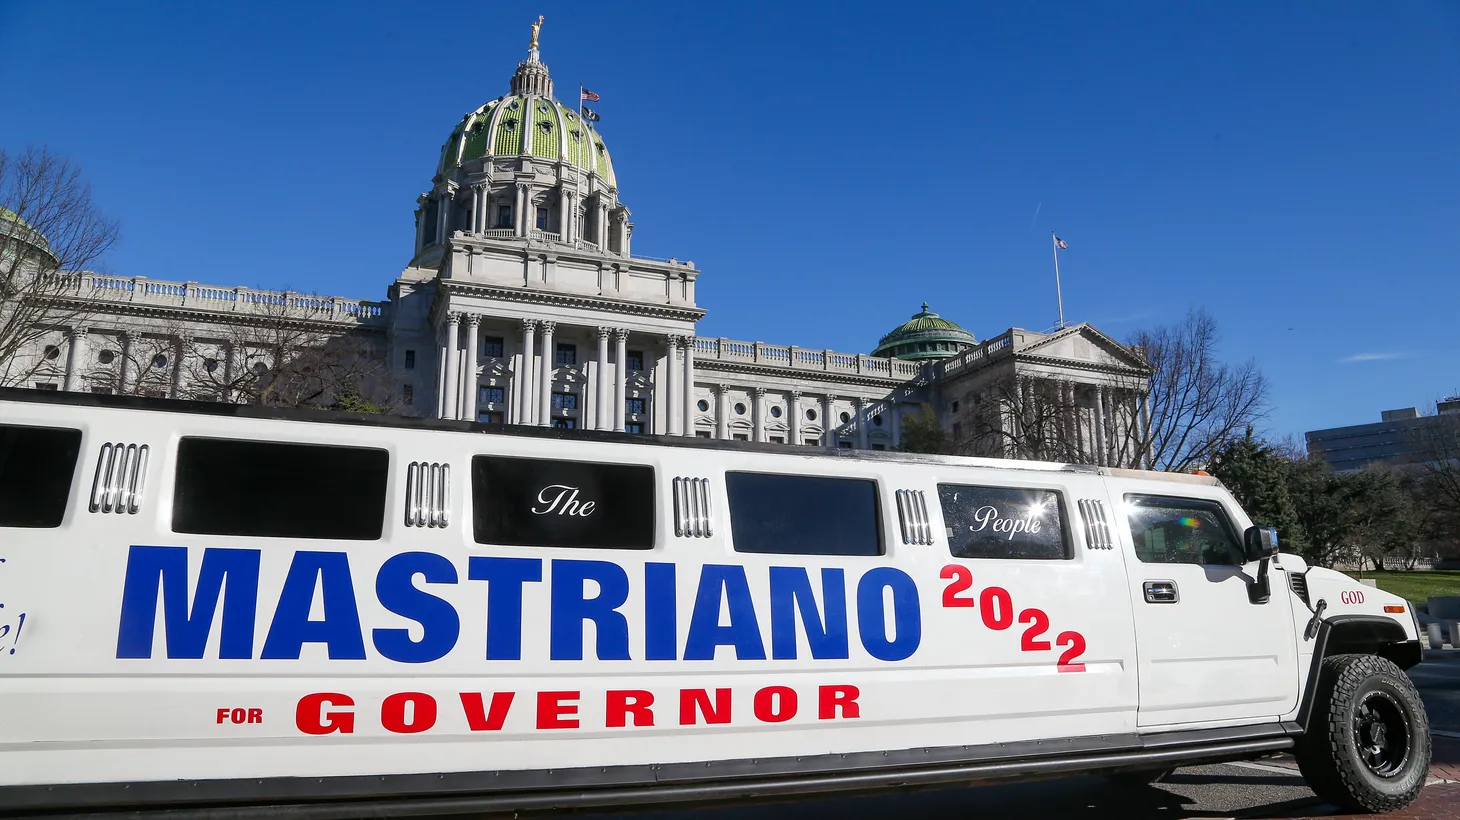 A Hummer stretch limousine is parked at the Pennsylvania State Capitol during Doug Mastriano's rally against vaccine mandates in Harrisburg, Pennsylvania on December 14, 2021.